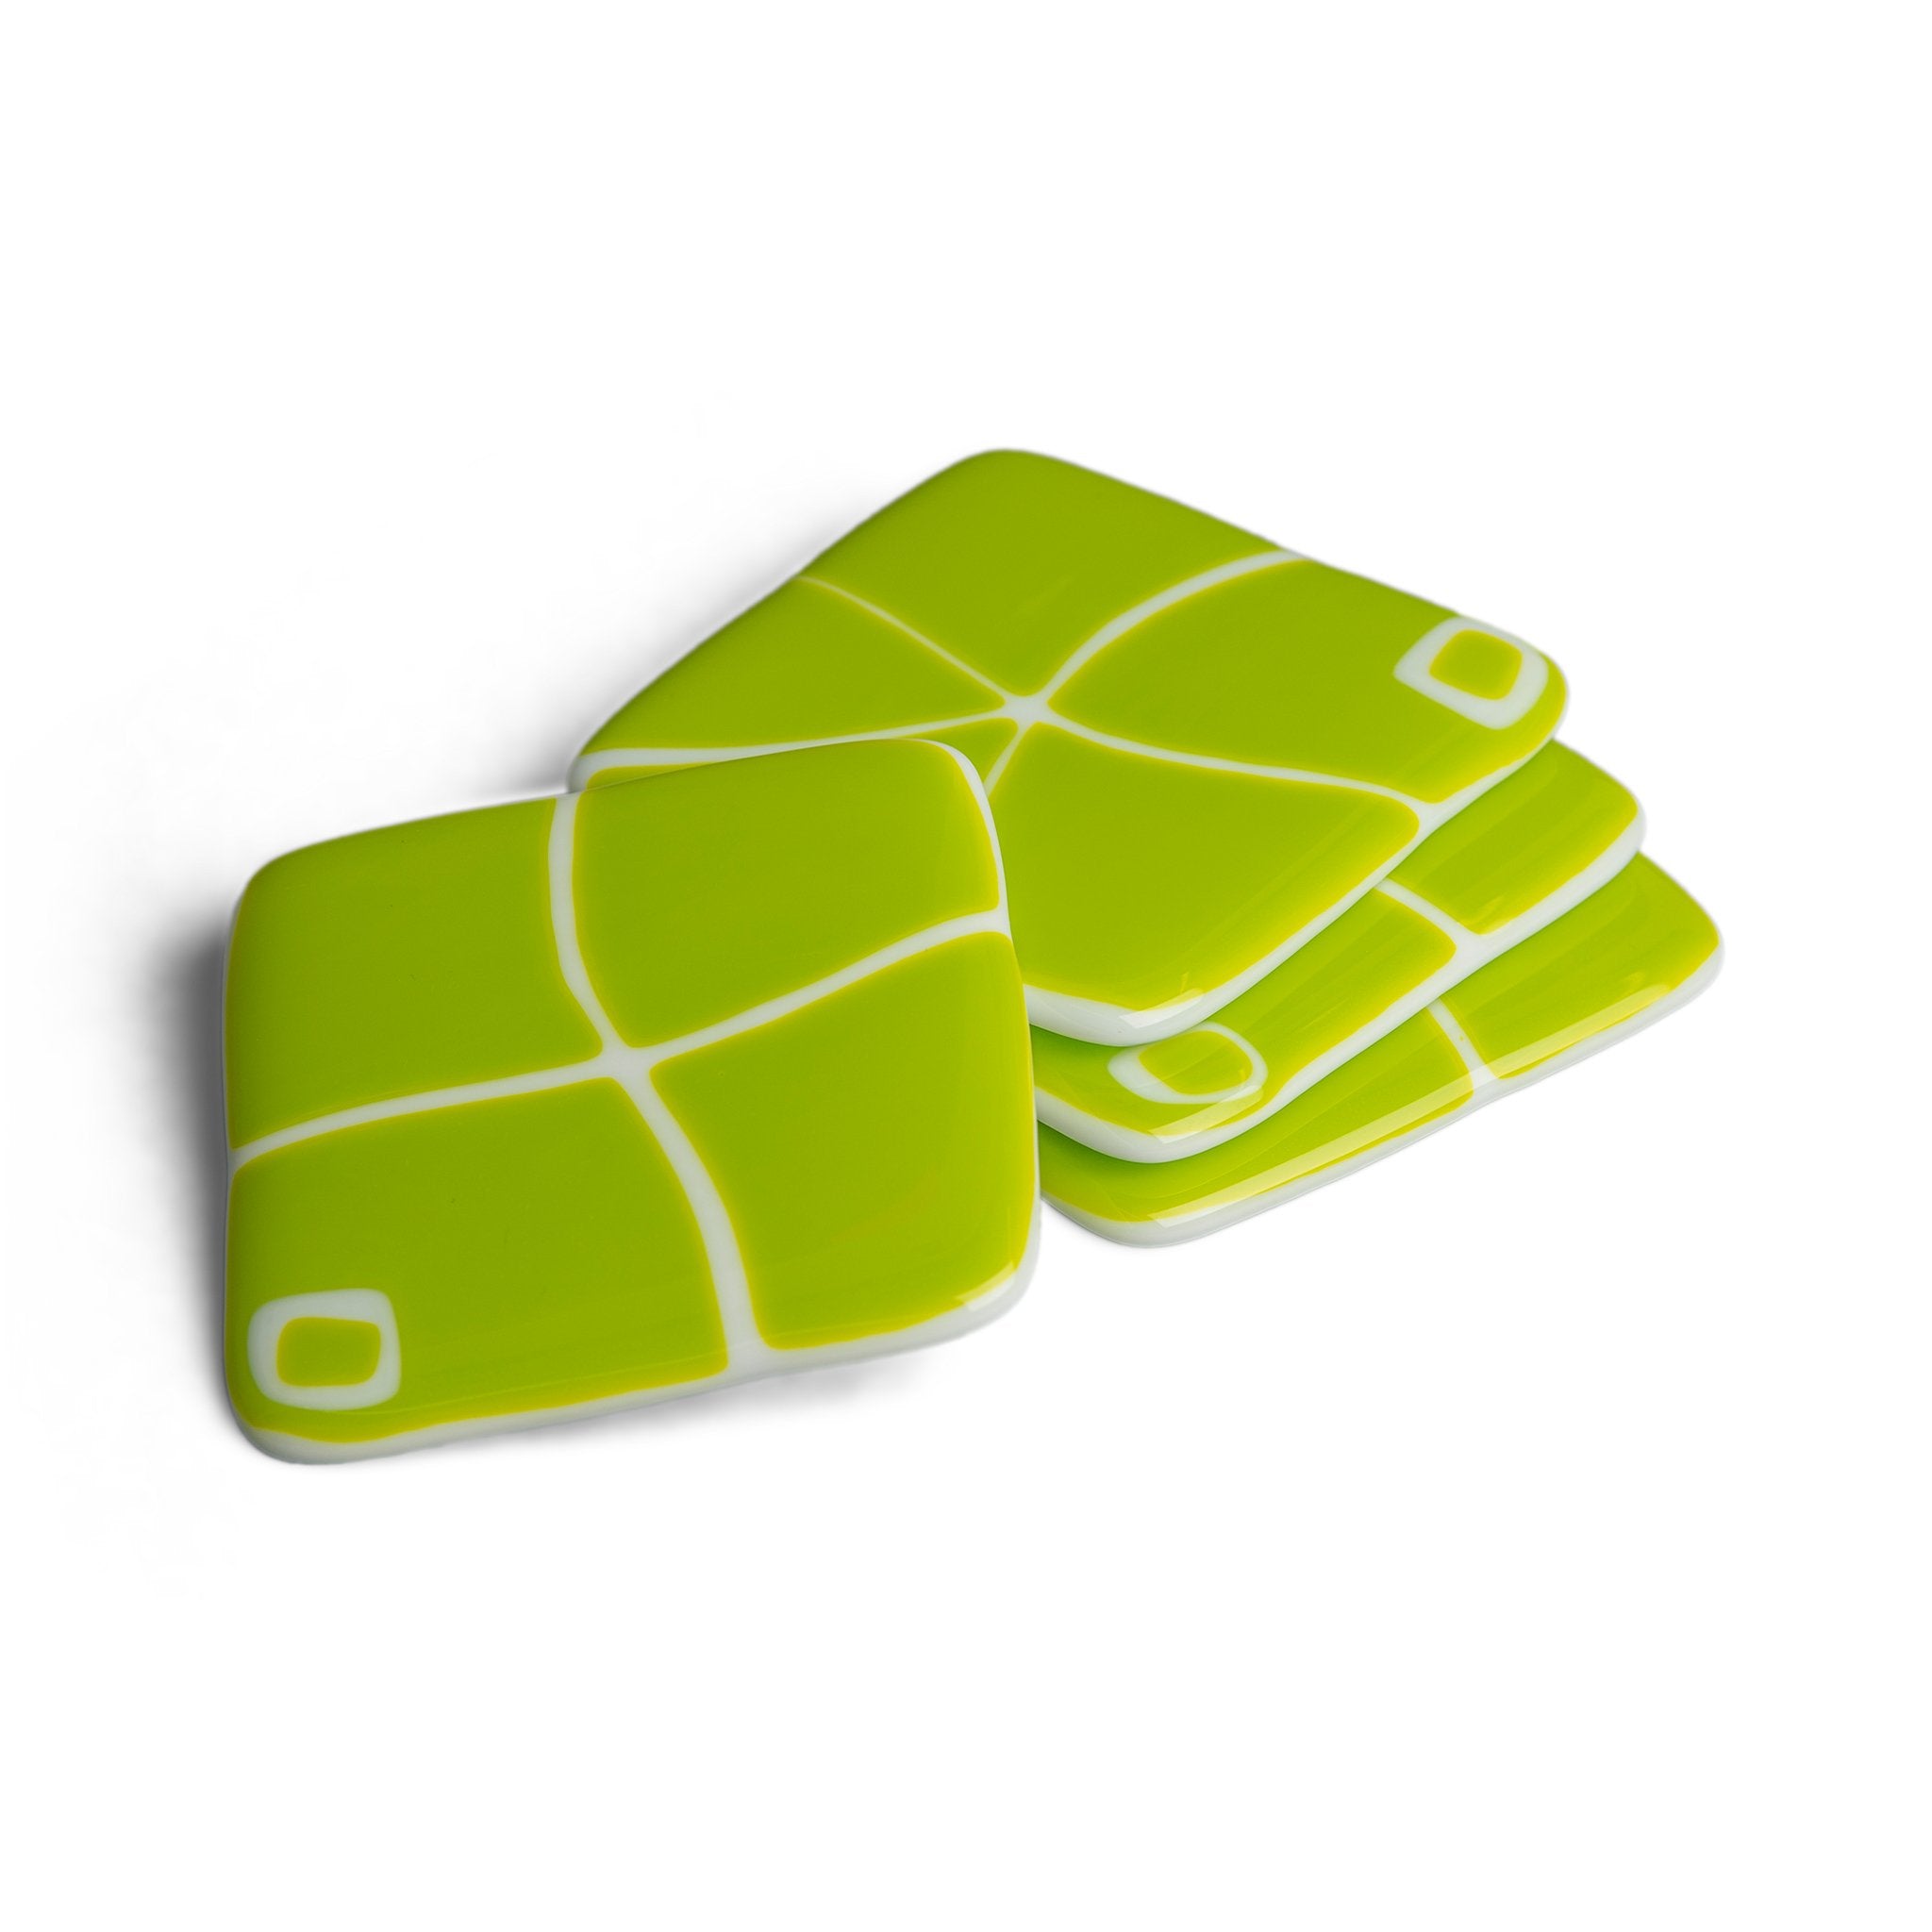 Spring Green Mod Squad Coasters, Set of 4